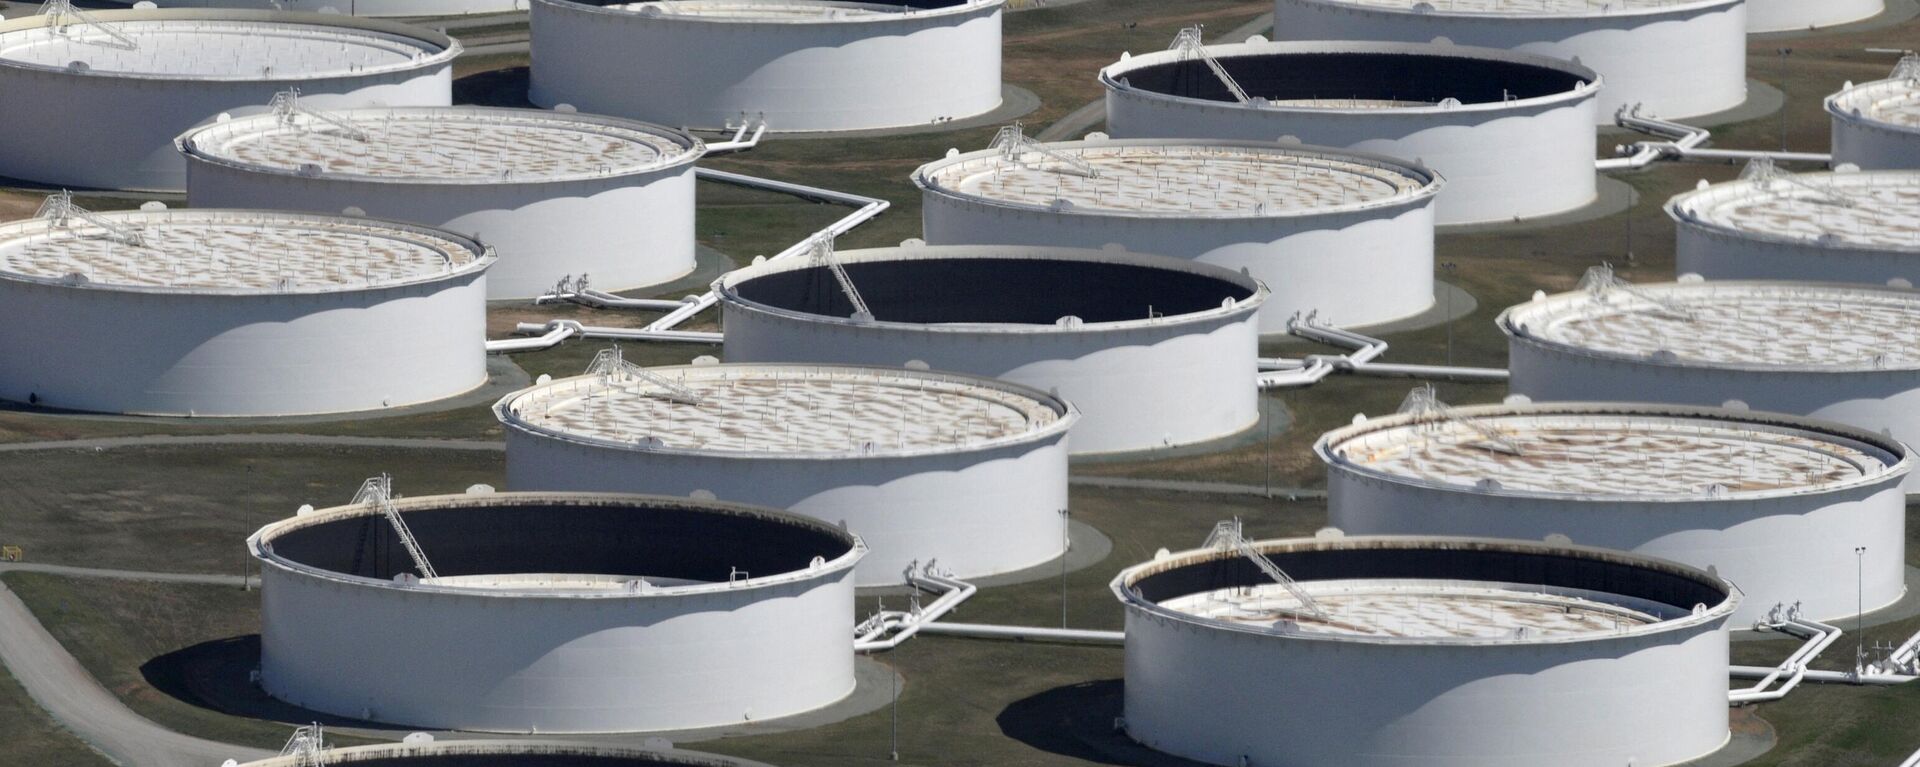 Crude oil storage tanks are seen from above at the Cushing oil hub, appearing to run out of space to contain a historic supply glut that has hammered prices, in Cushing, Oklahoma, March 24, 2016. - Sputnik International, 1920, 29.03.2022